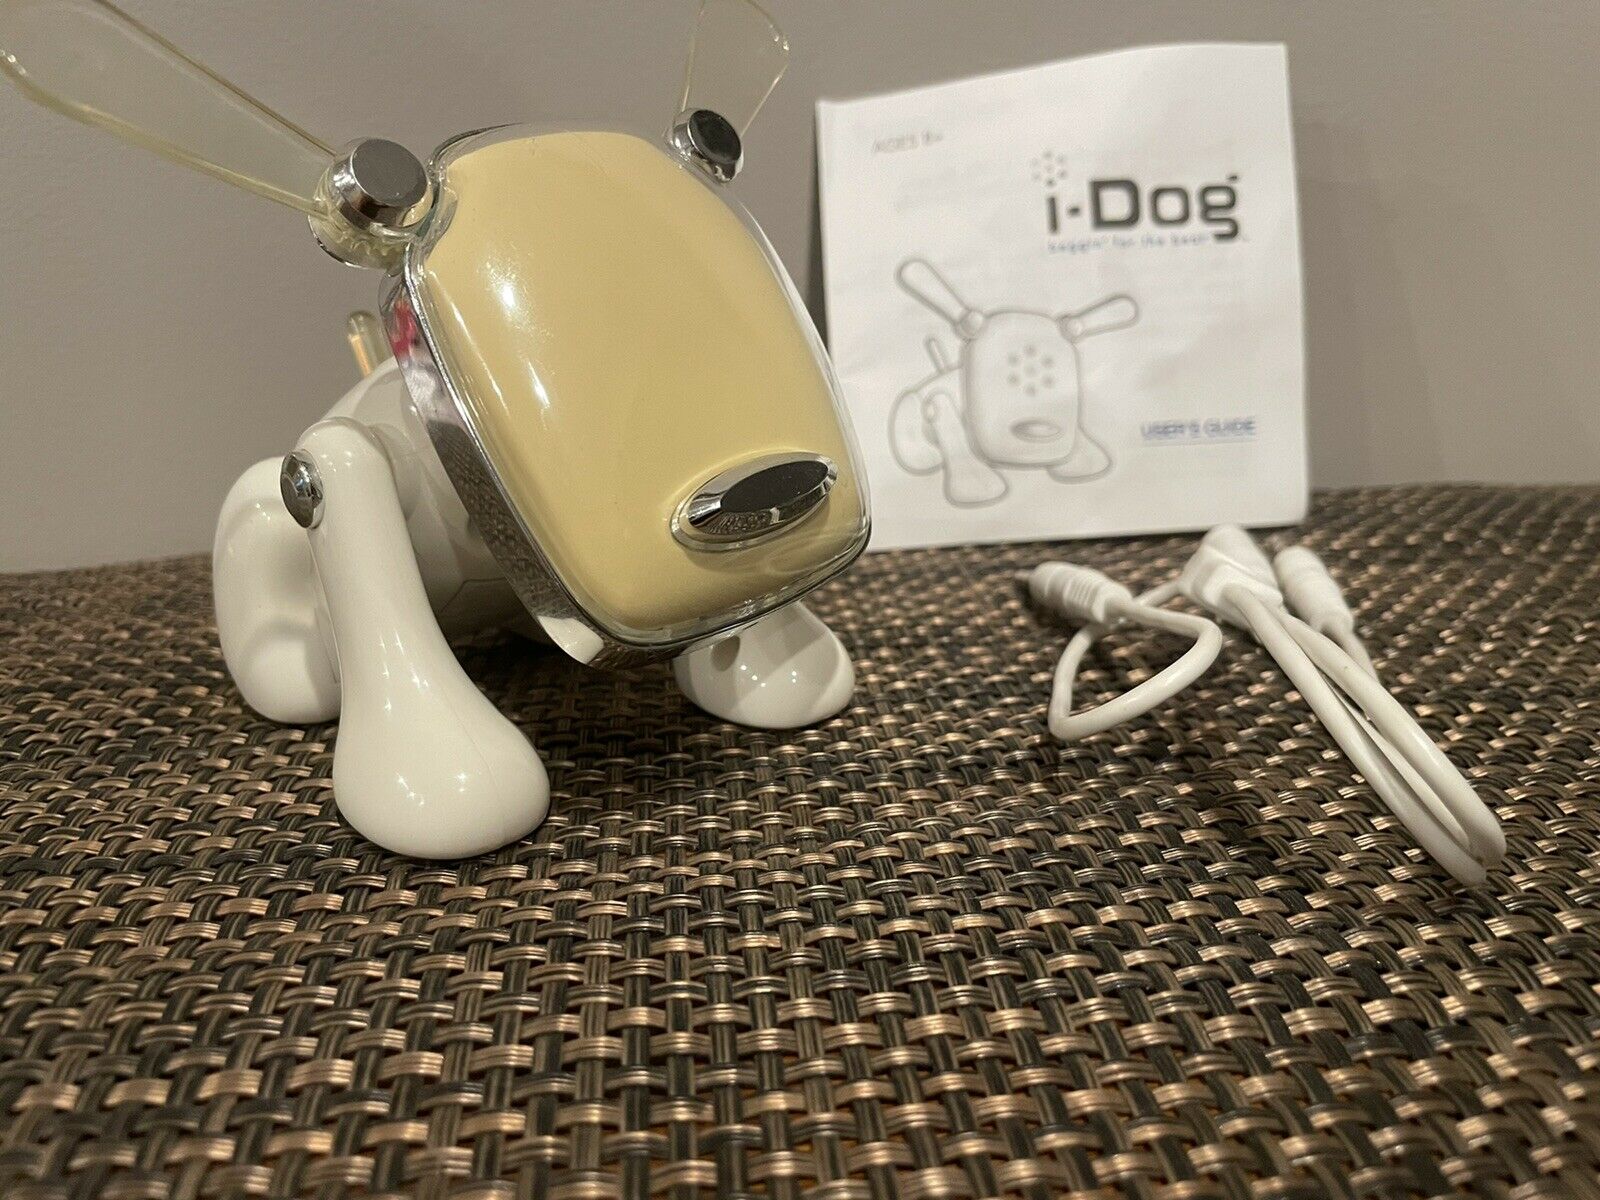 2005 Hasbro I Dog Beggin For The Beat. With Cord And Users Guide.